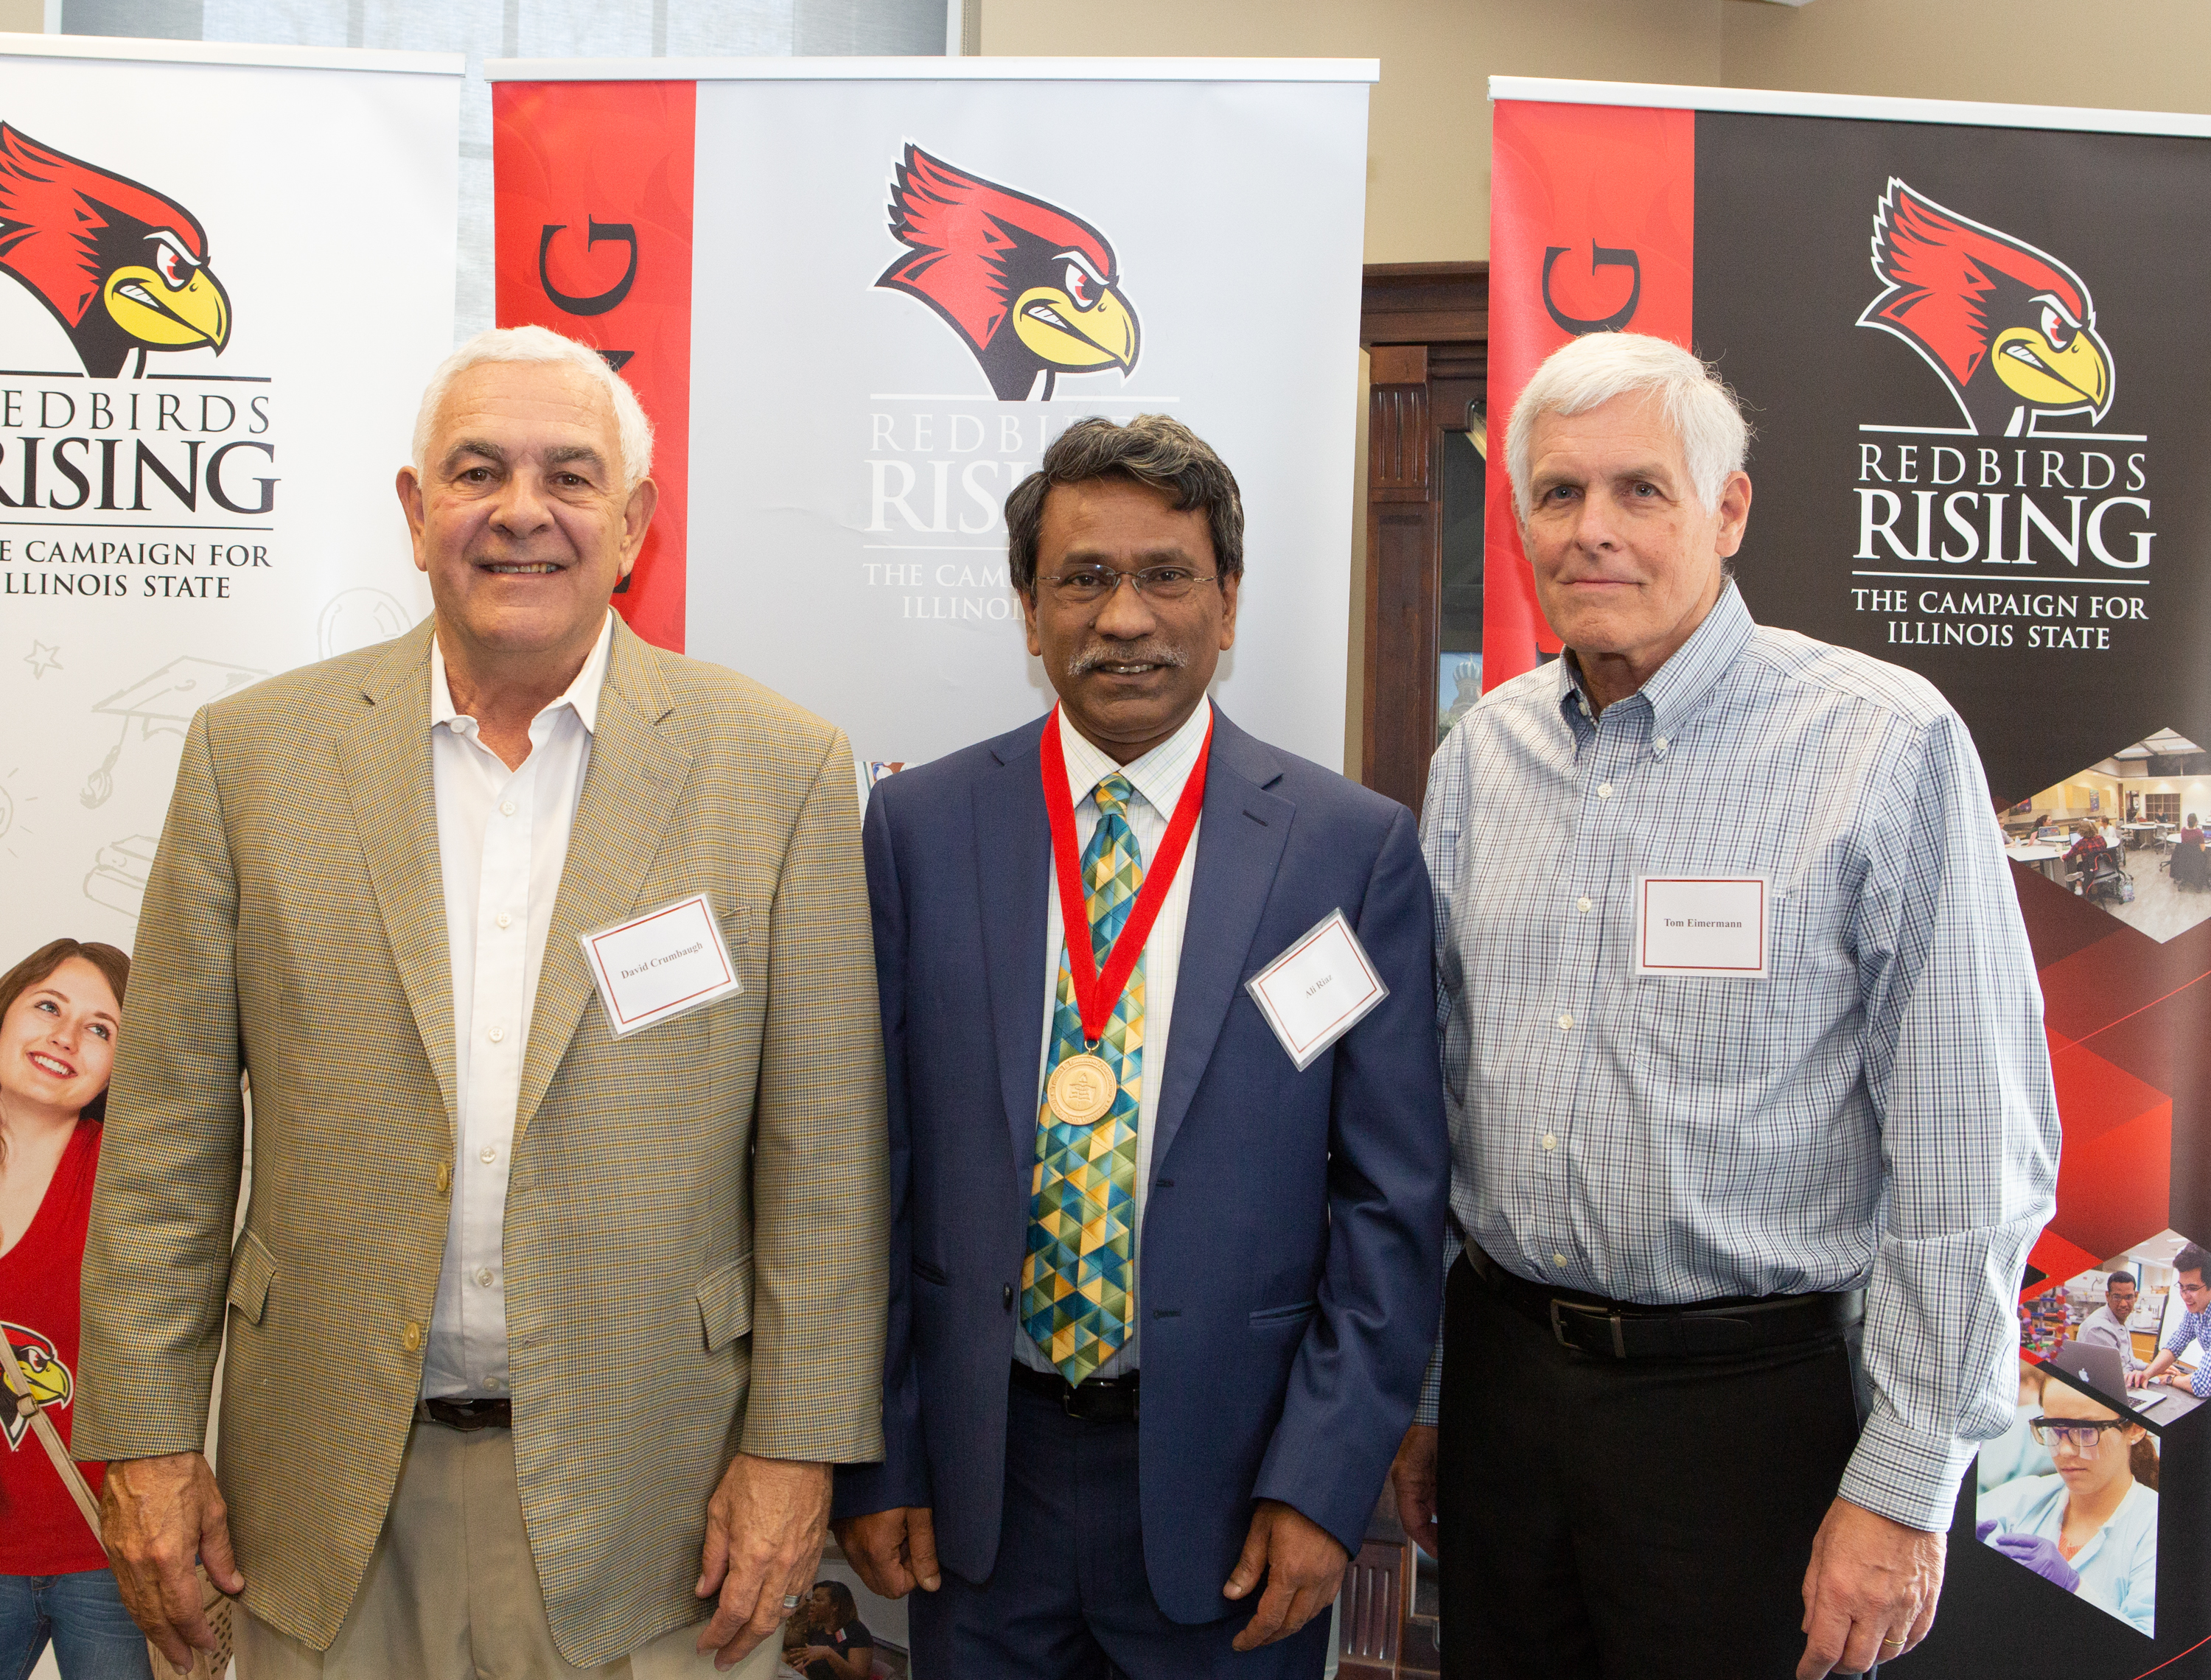 (Left to right) David Crumbaugh, donor of the Thomas E. Eimermann Professorship, Distinguished Professor Ali Riaz, and Professor Emeritus Thomas Eimermann